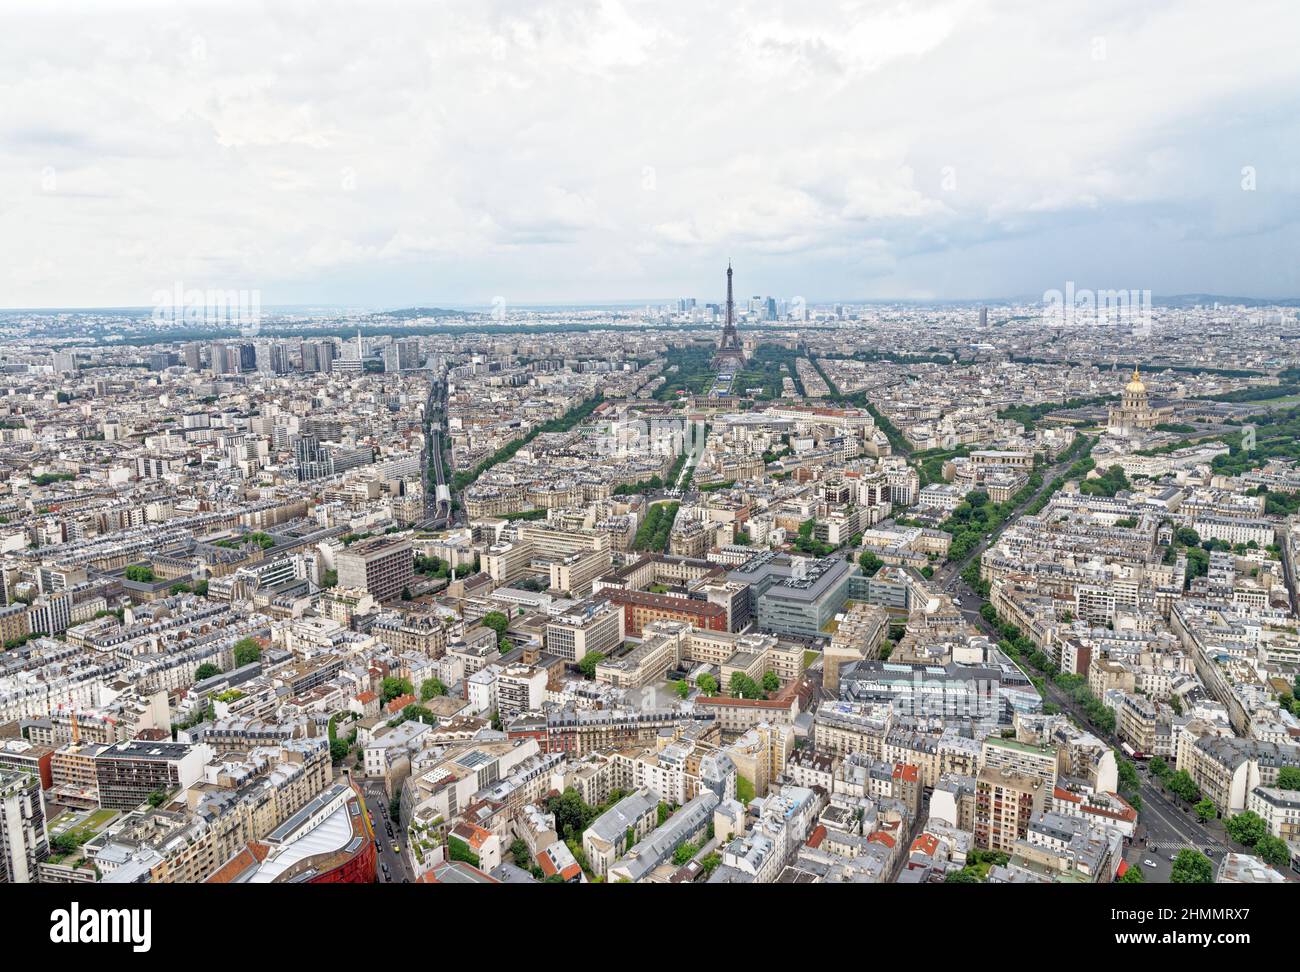 Eiffel tower top deck hi-res stock photography and images - Alamy